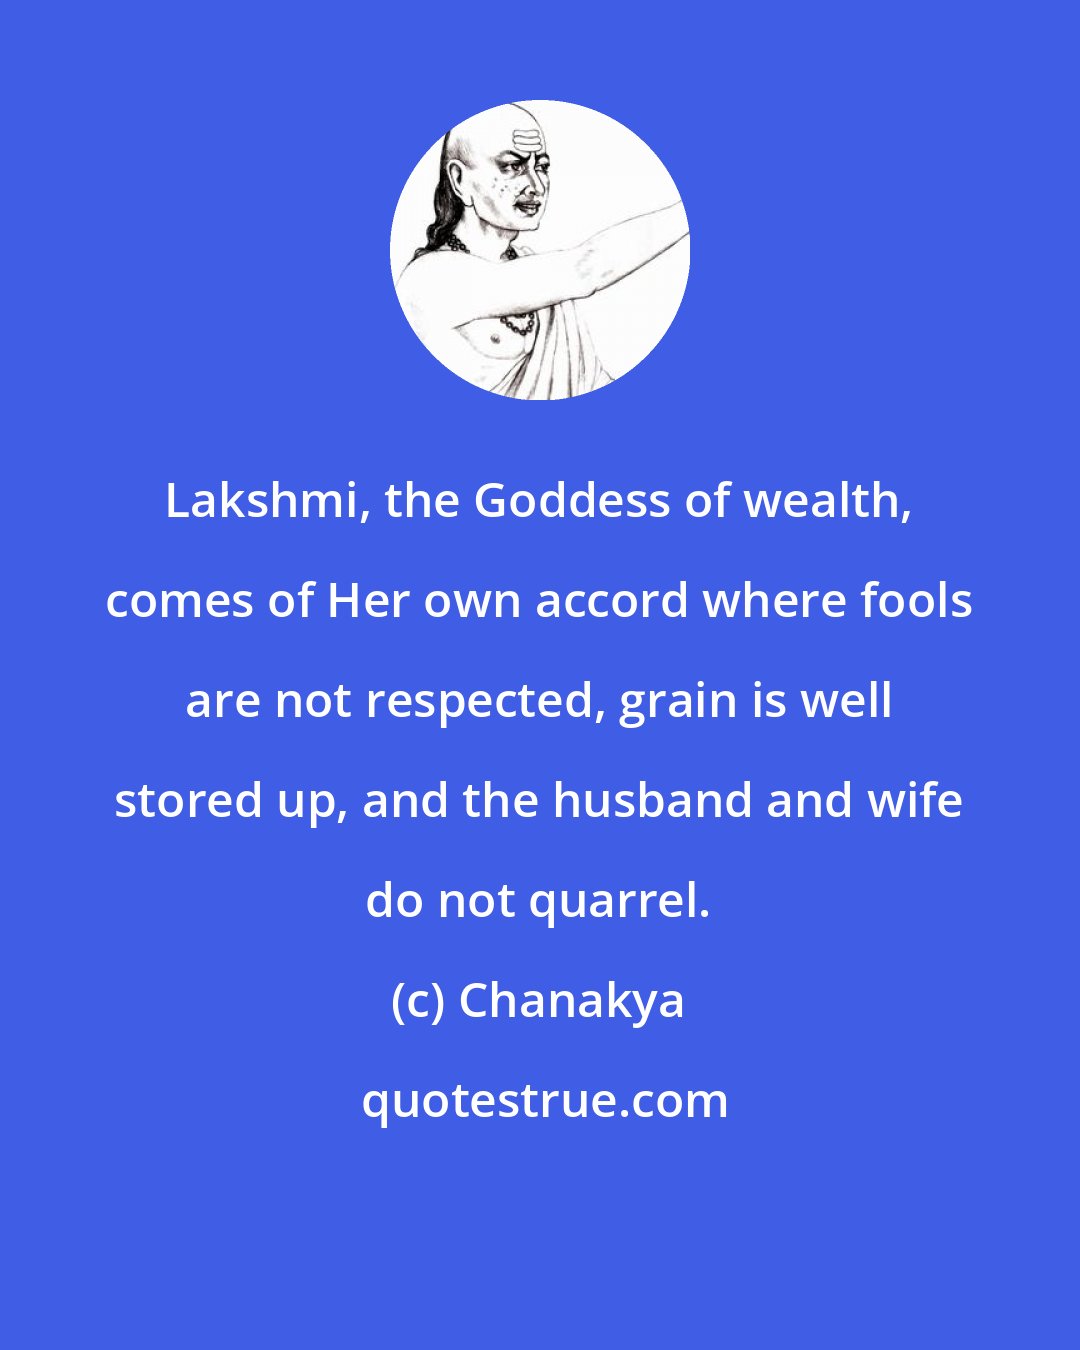 Chanakya: Lakshmi, the Goddess of wealth, comes of Her own accord where fools are not respected, grain is well stored up, and the husband and wife do not quarrel.